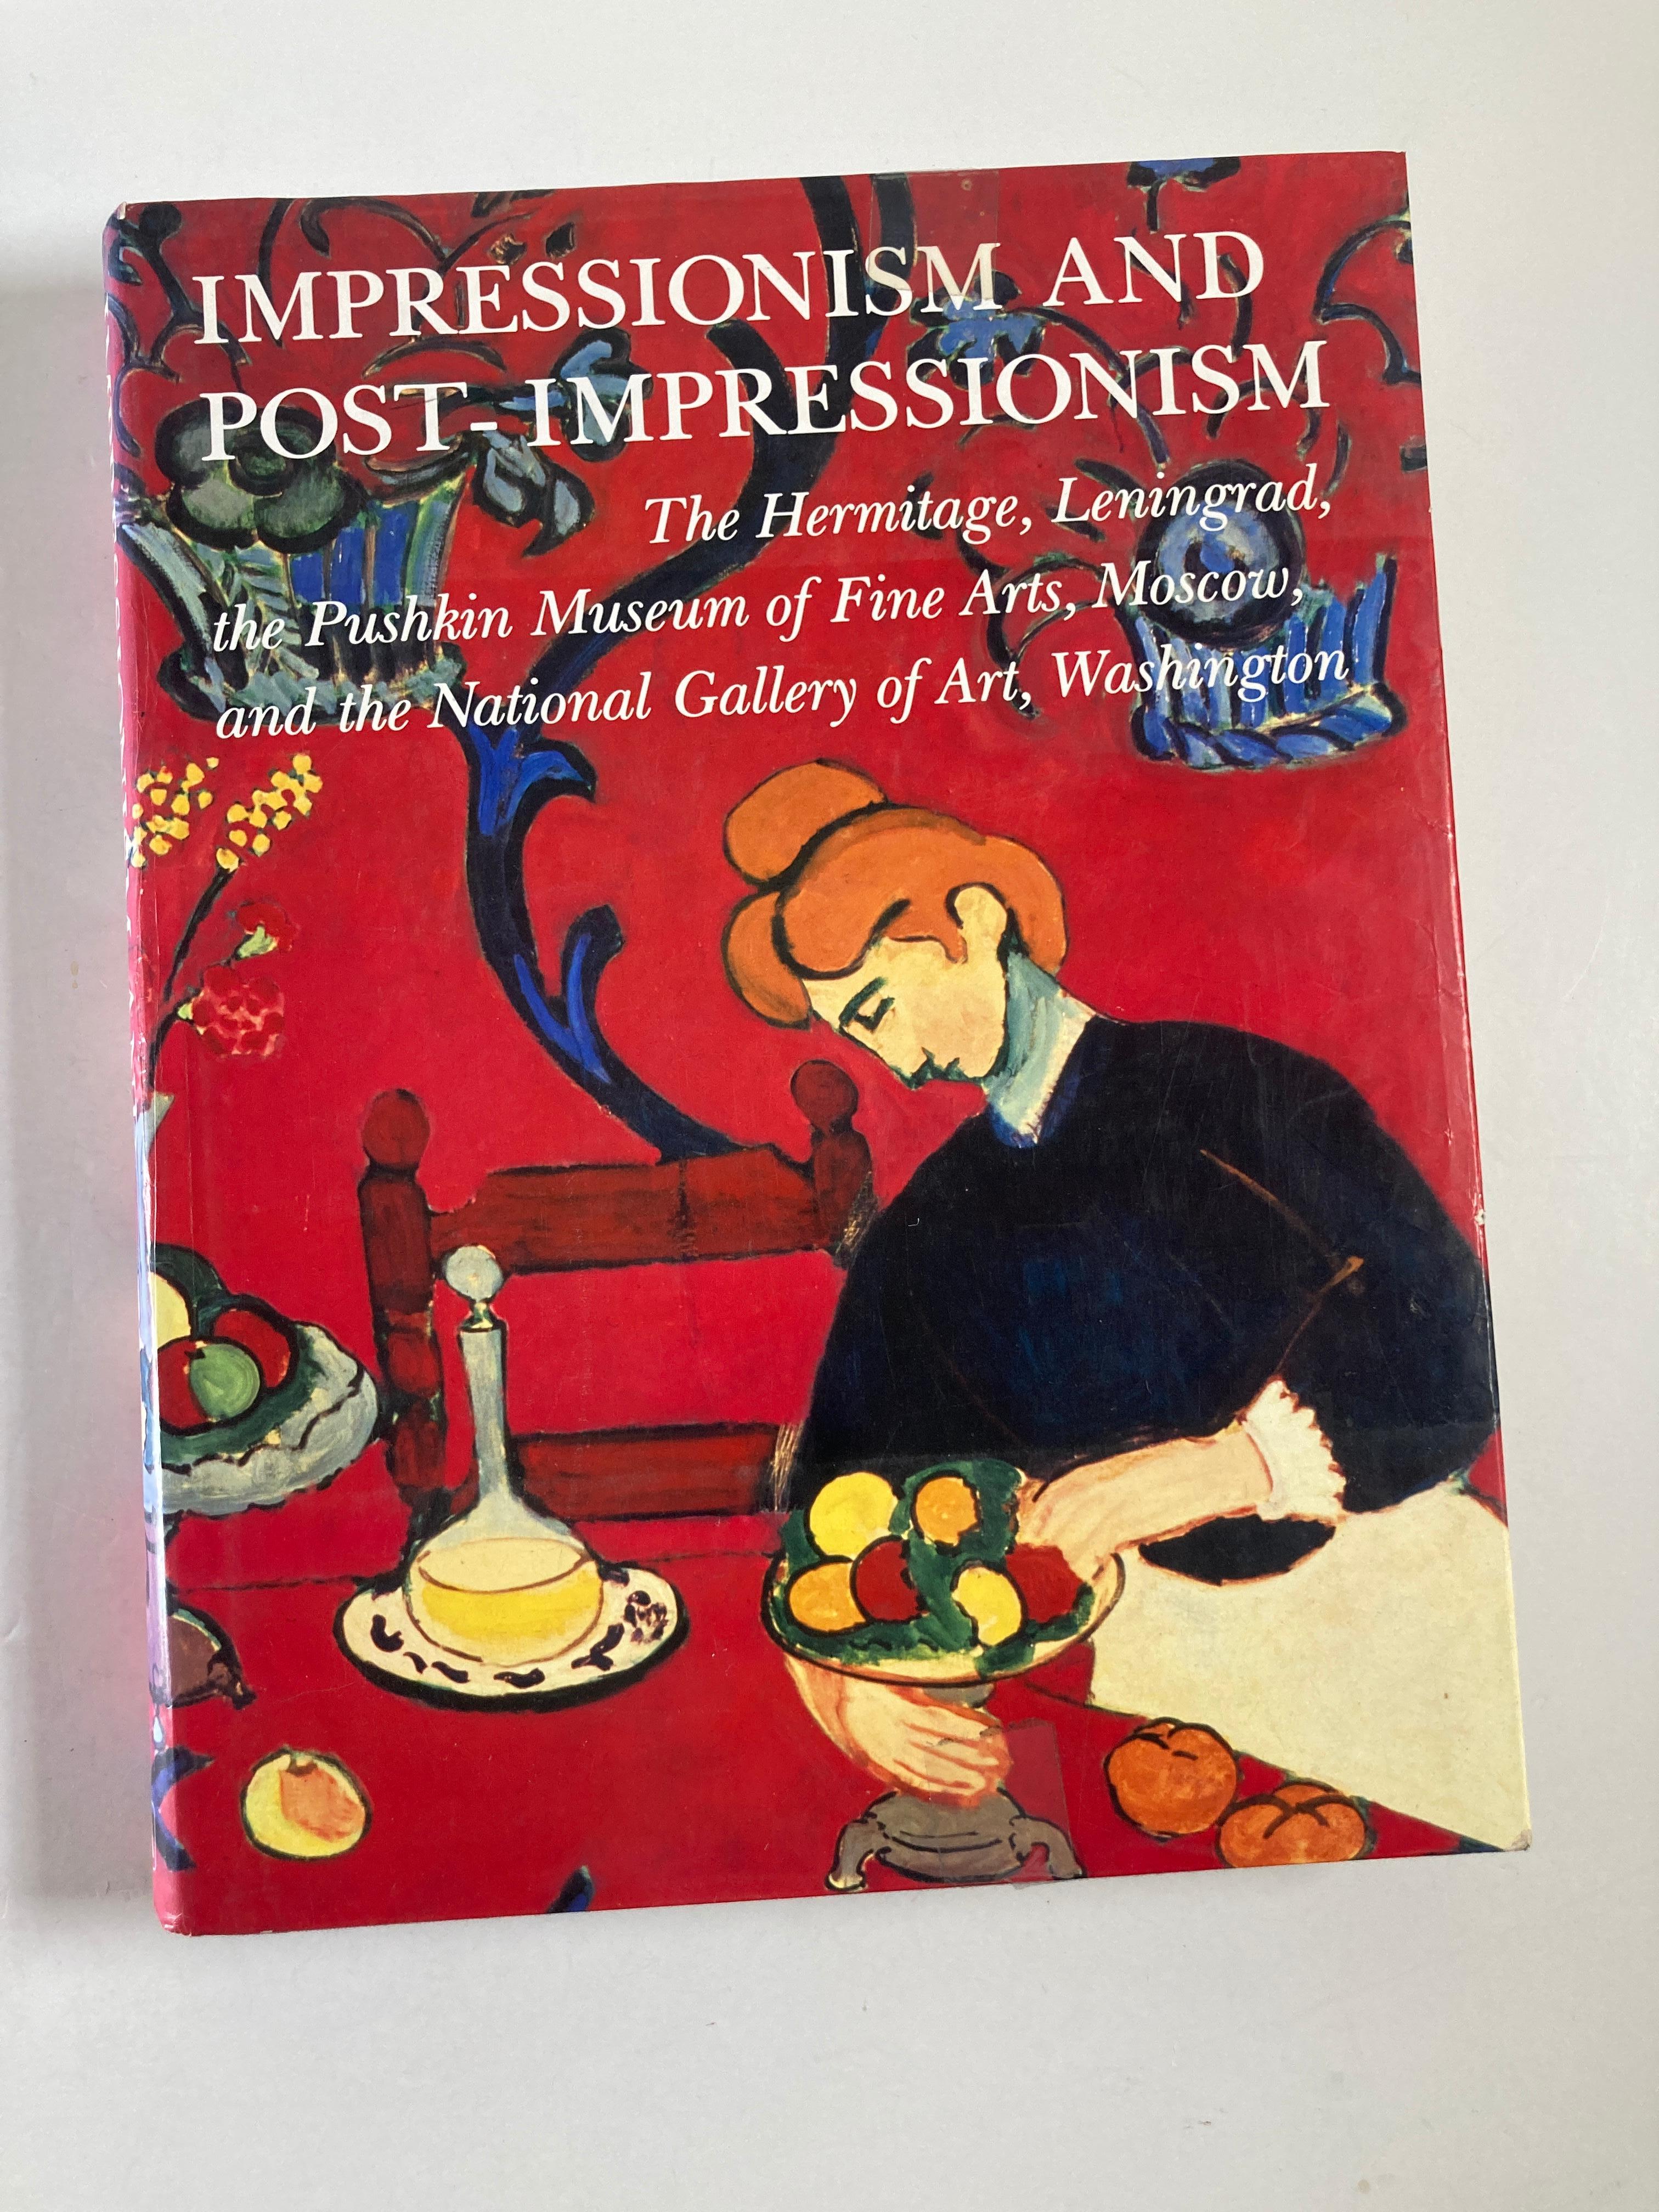 Impressionism and Post-impressionism: The Hermitage, Leningrad, the Pushkin Museum of Fine Arts, Moscow, and the National Gallery of Art, Washington.
Vintage 1986 1st Edition Impressionism & Post Impressionism Monumental Collector's Art Book
Hugh